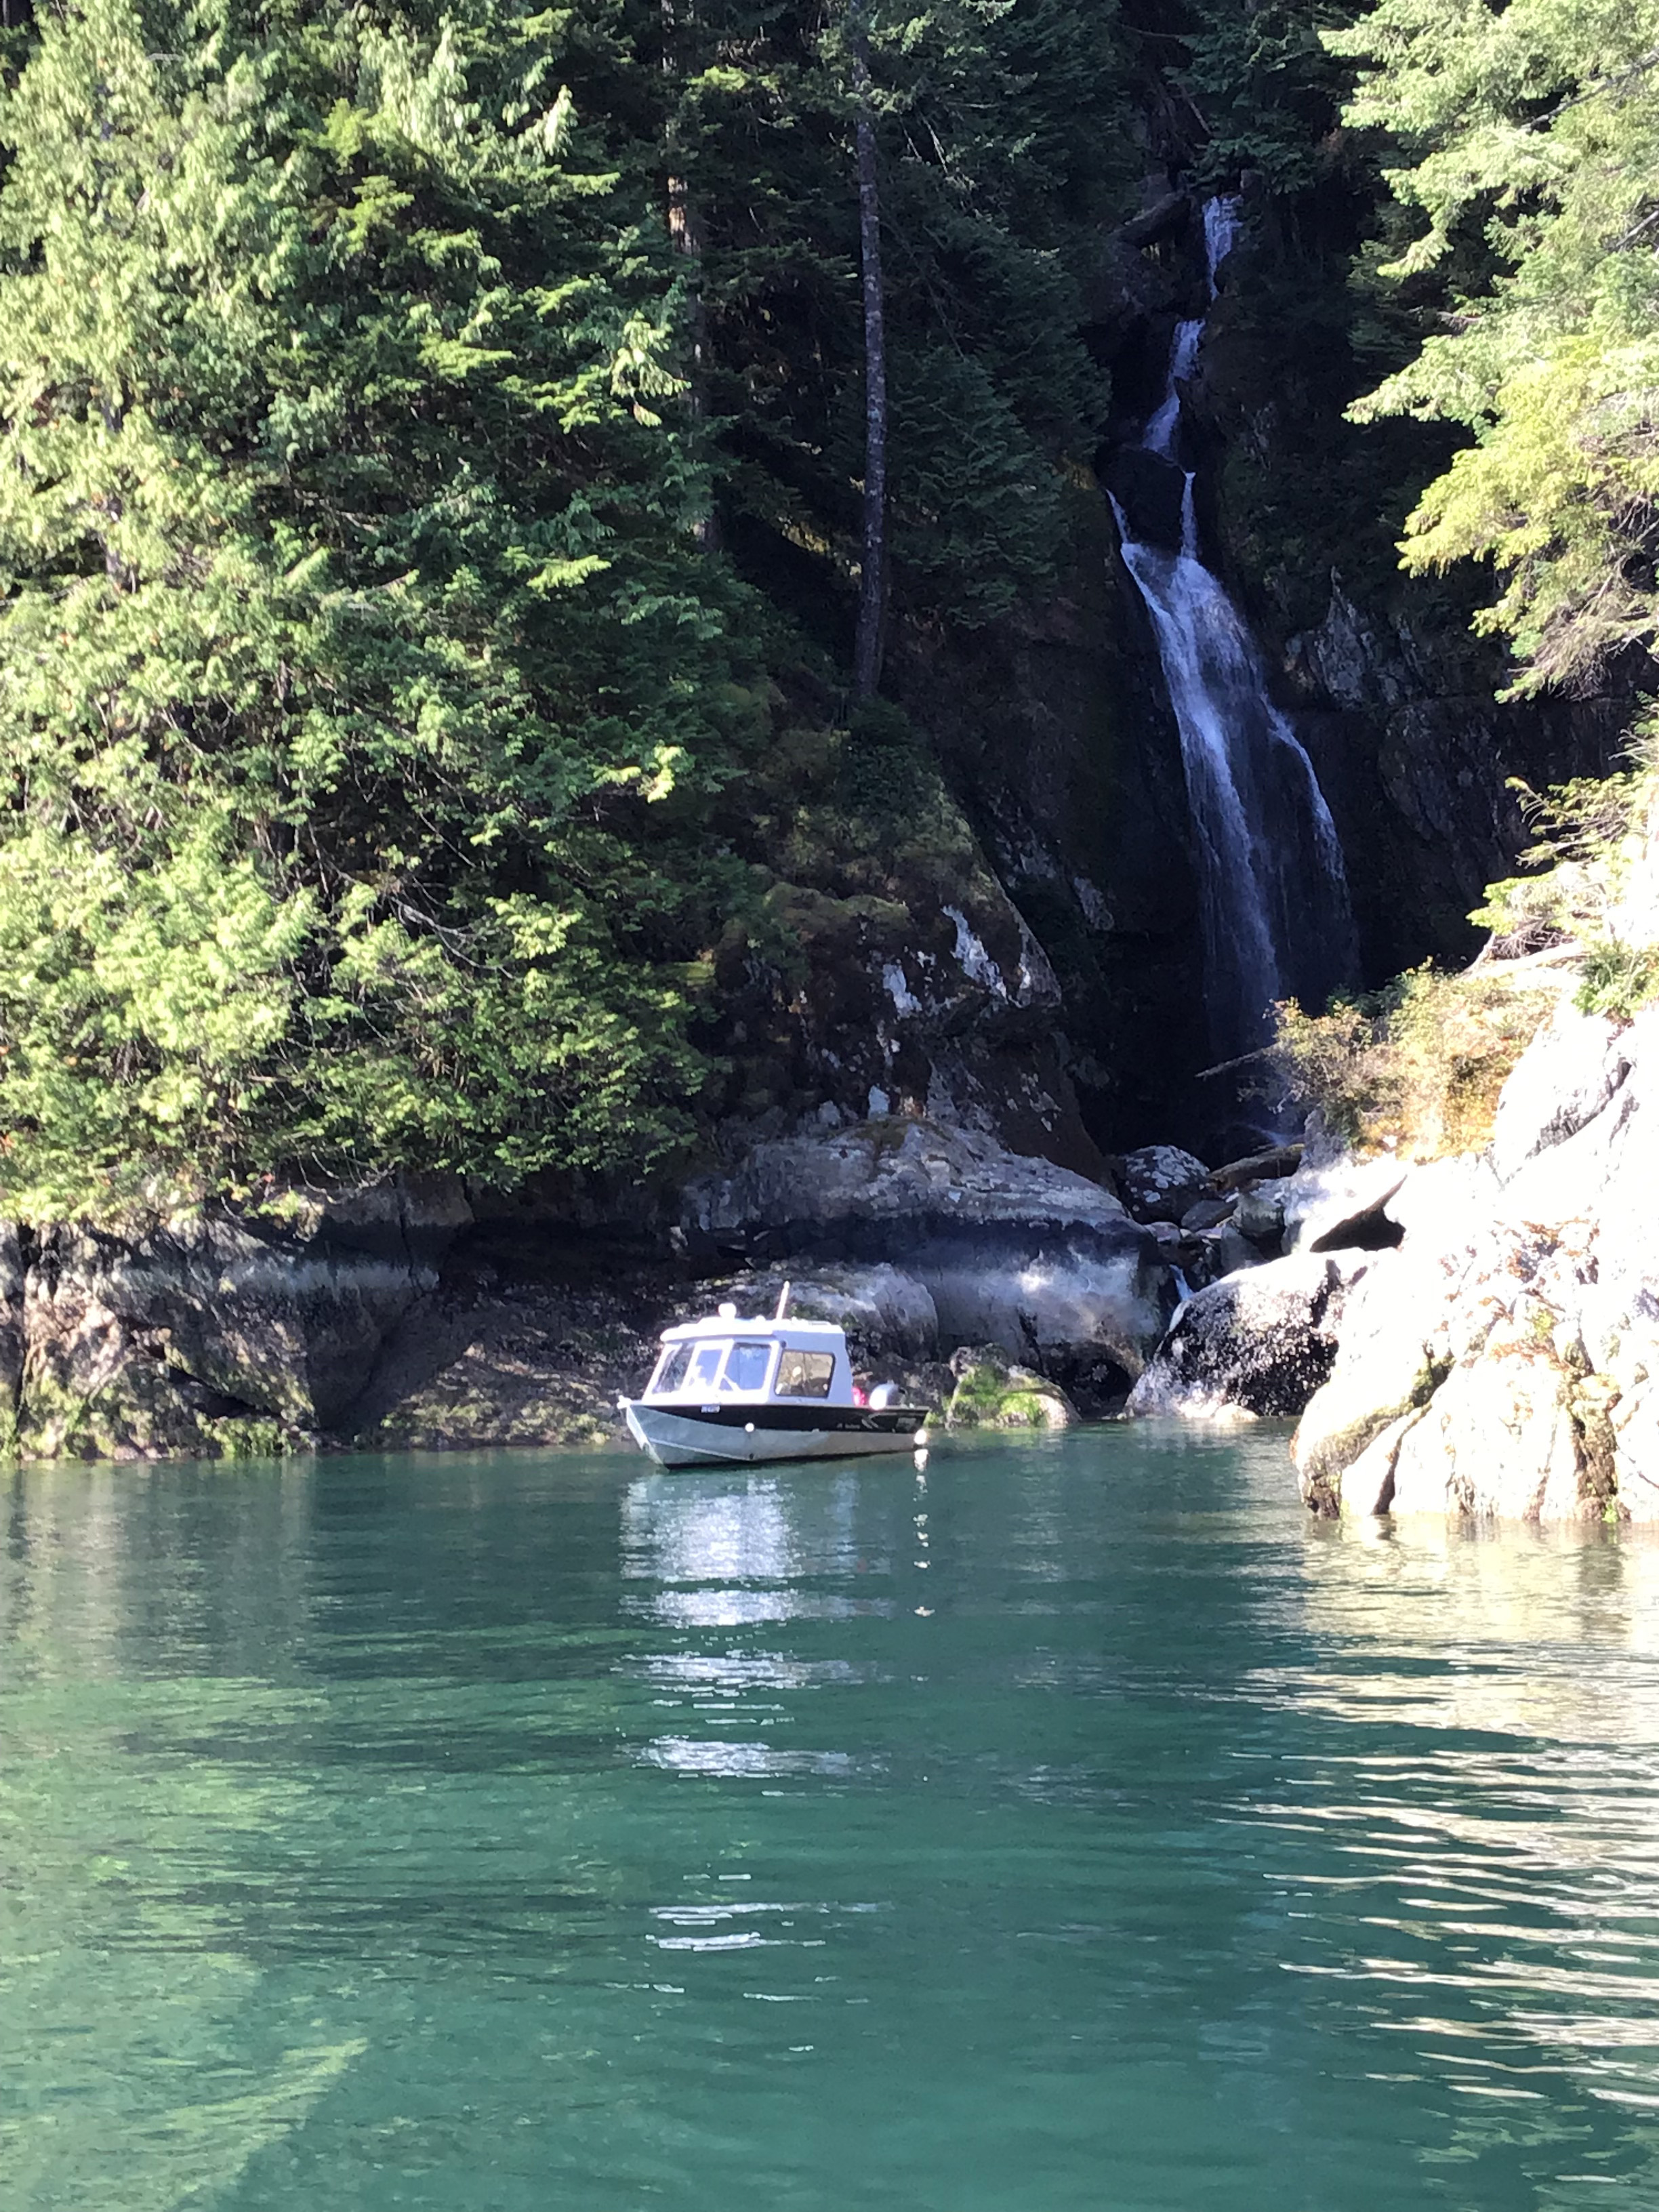 3 Hour Tour To Granite Falls Boat Charter | Deep Cove Boat Tours - Indian Arm Boat Taxi